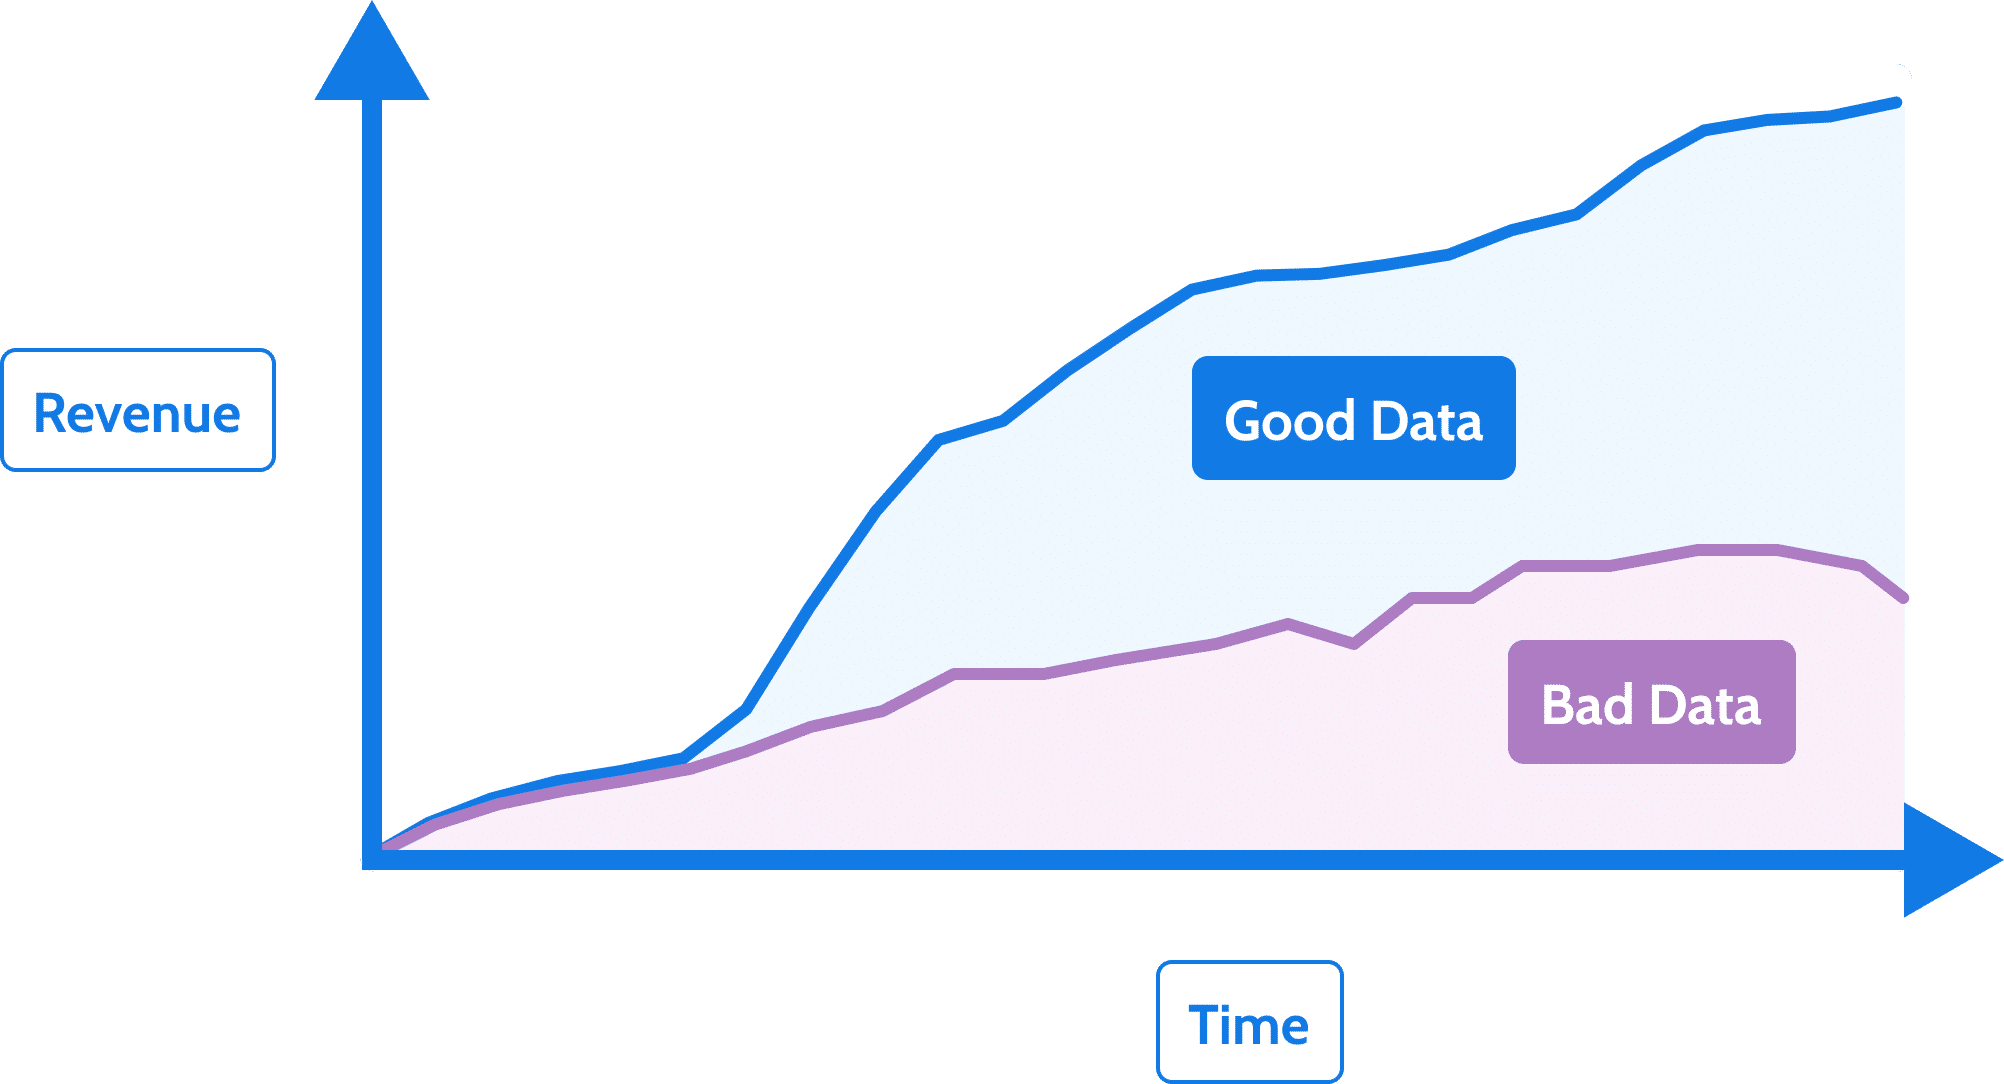 A graph showing the potential value gain of using good data versus bad data